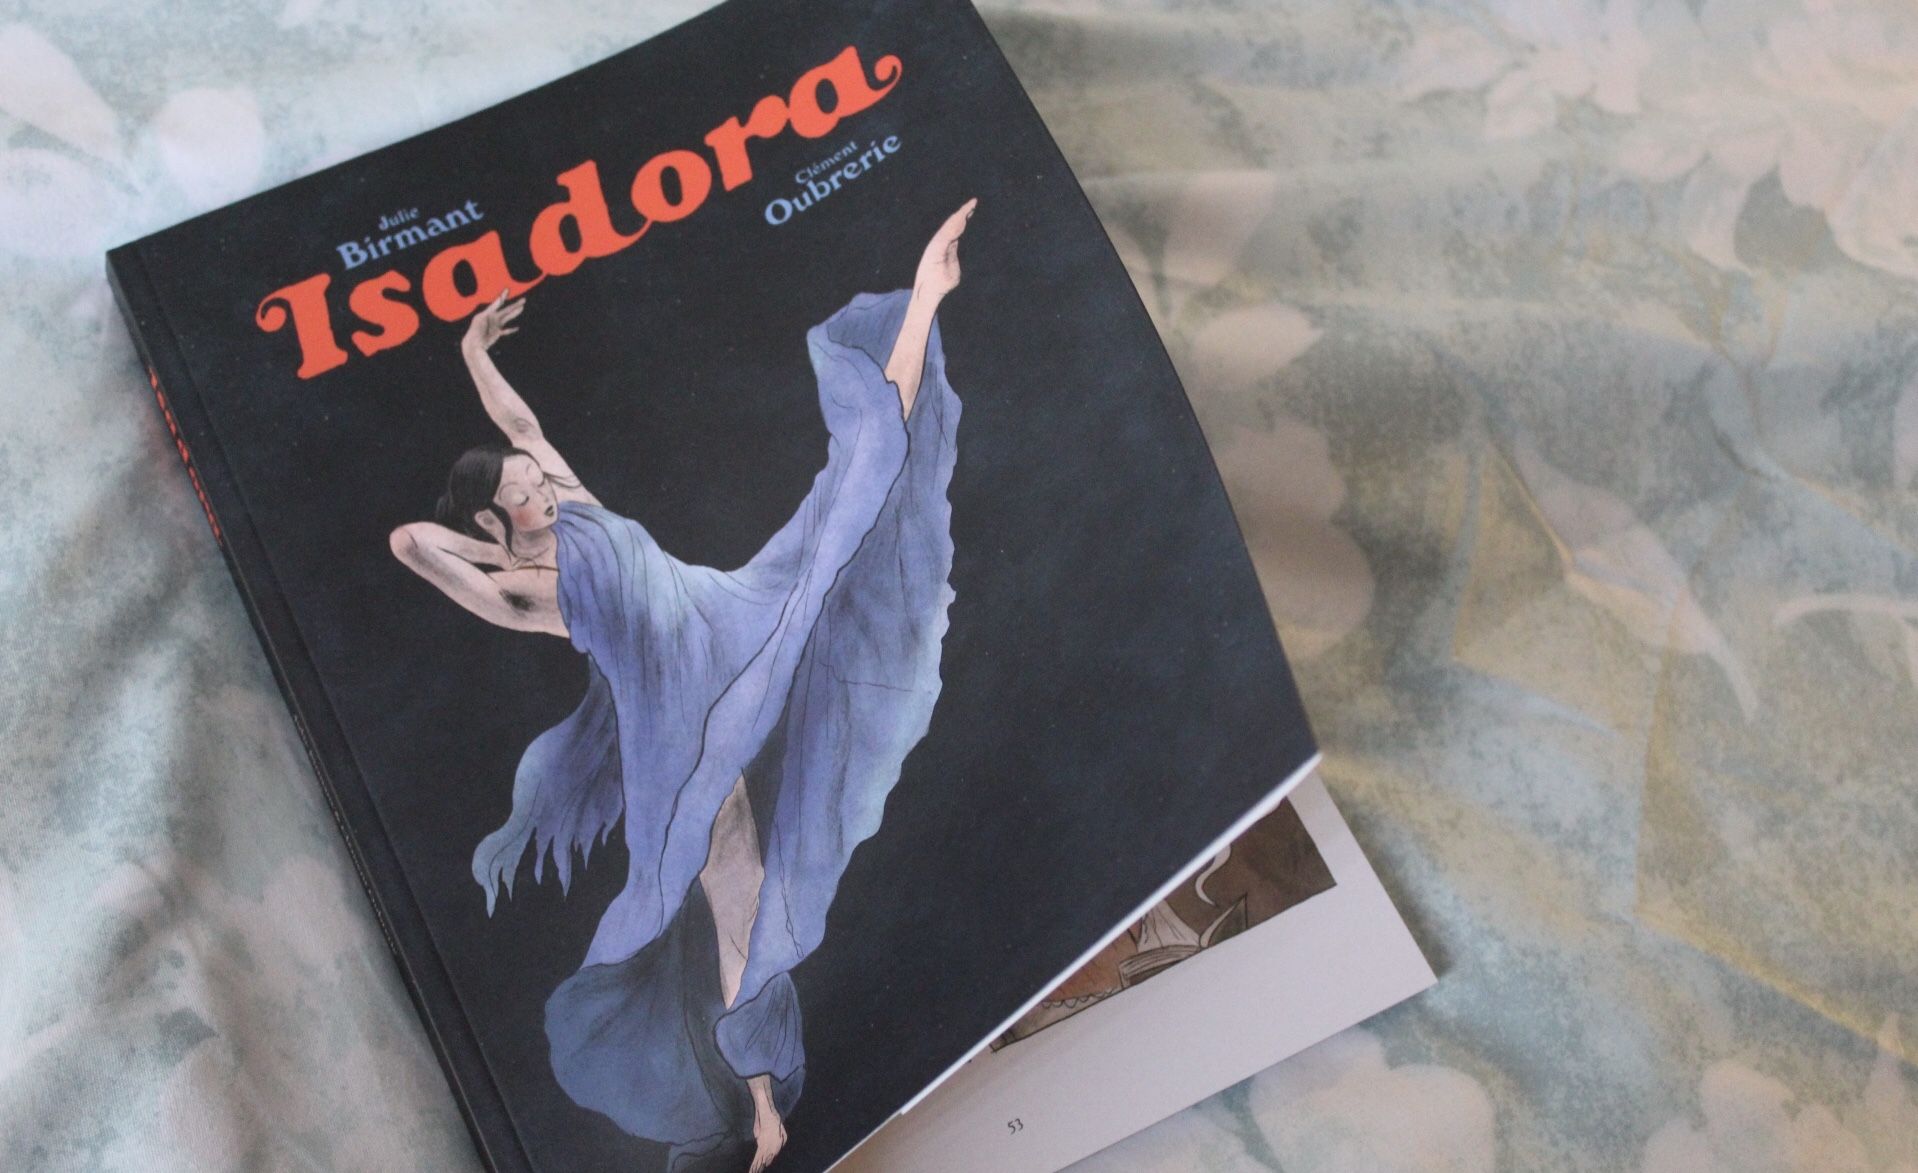 Isadora cover